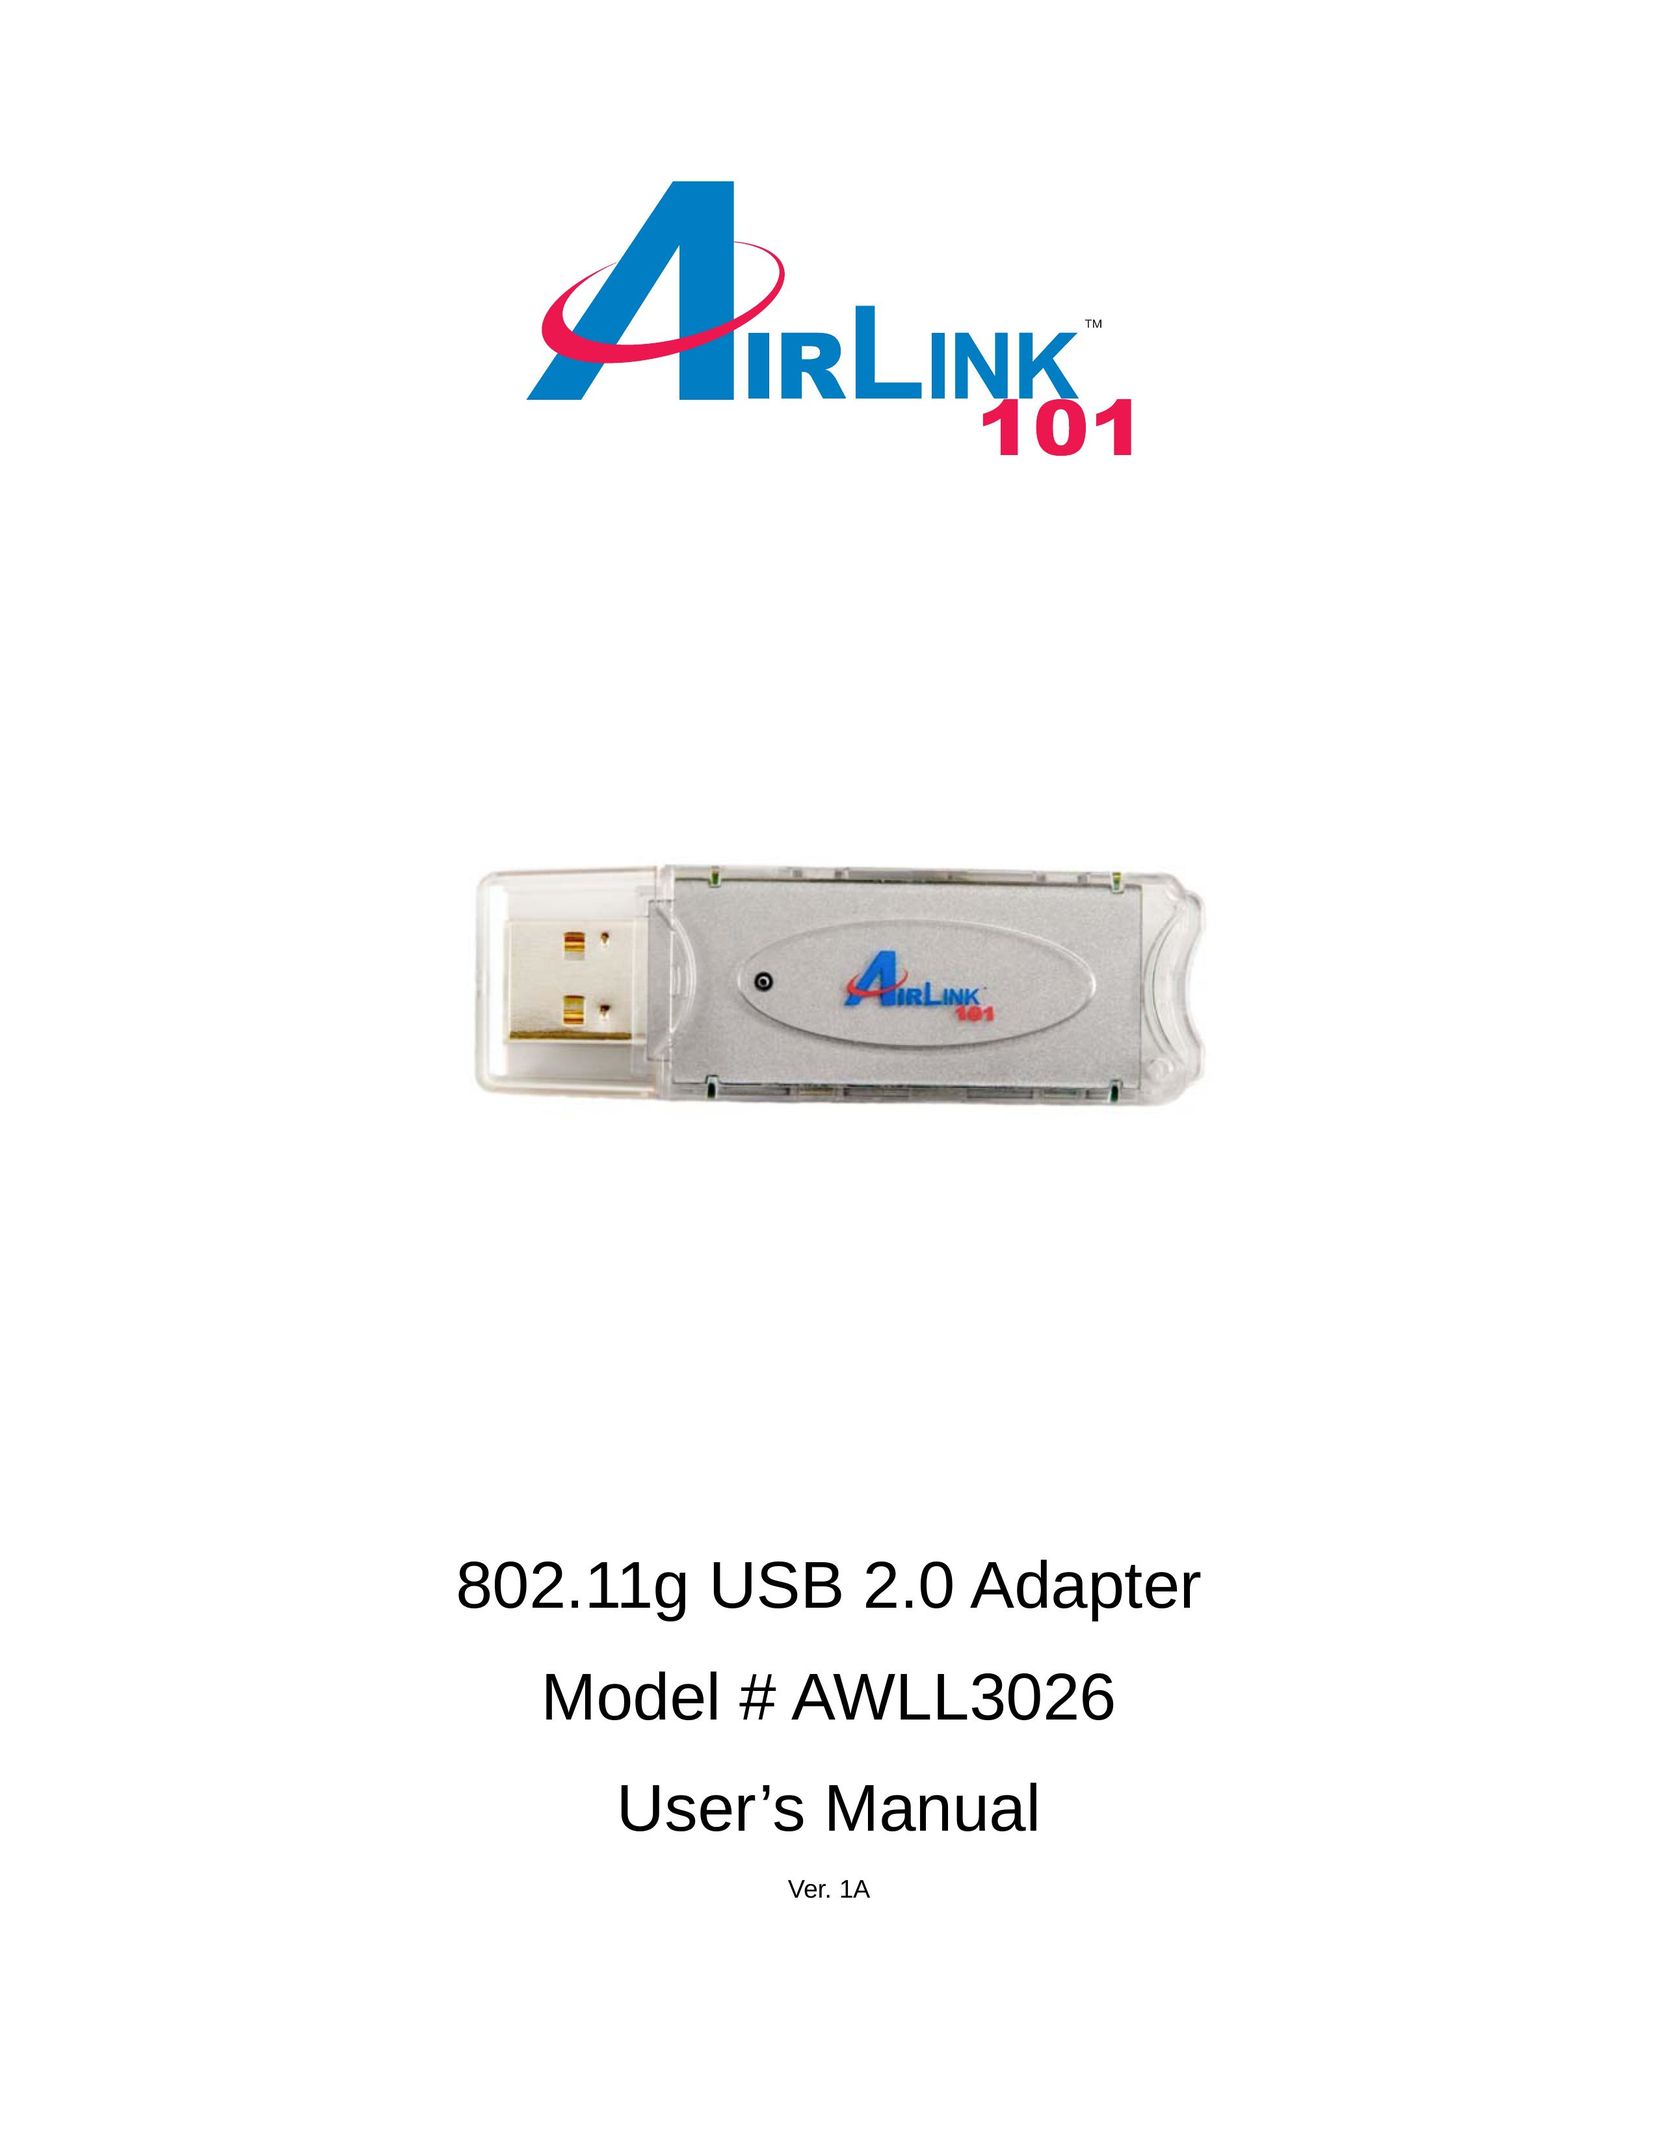 Airlink101 AWLL3026 Network Card User Manual